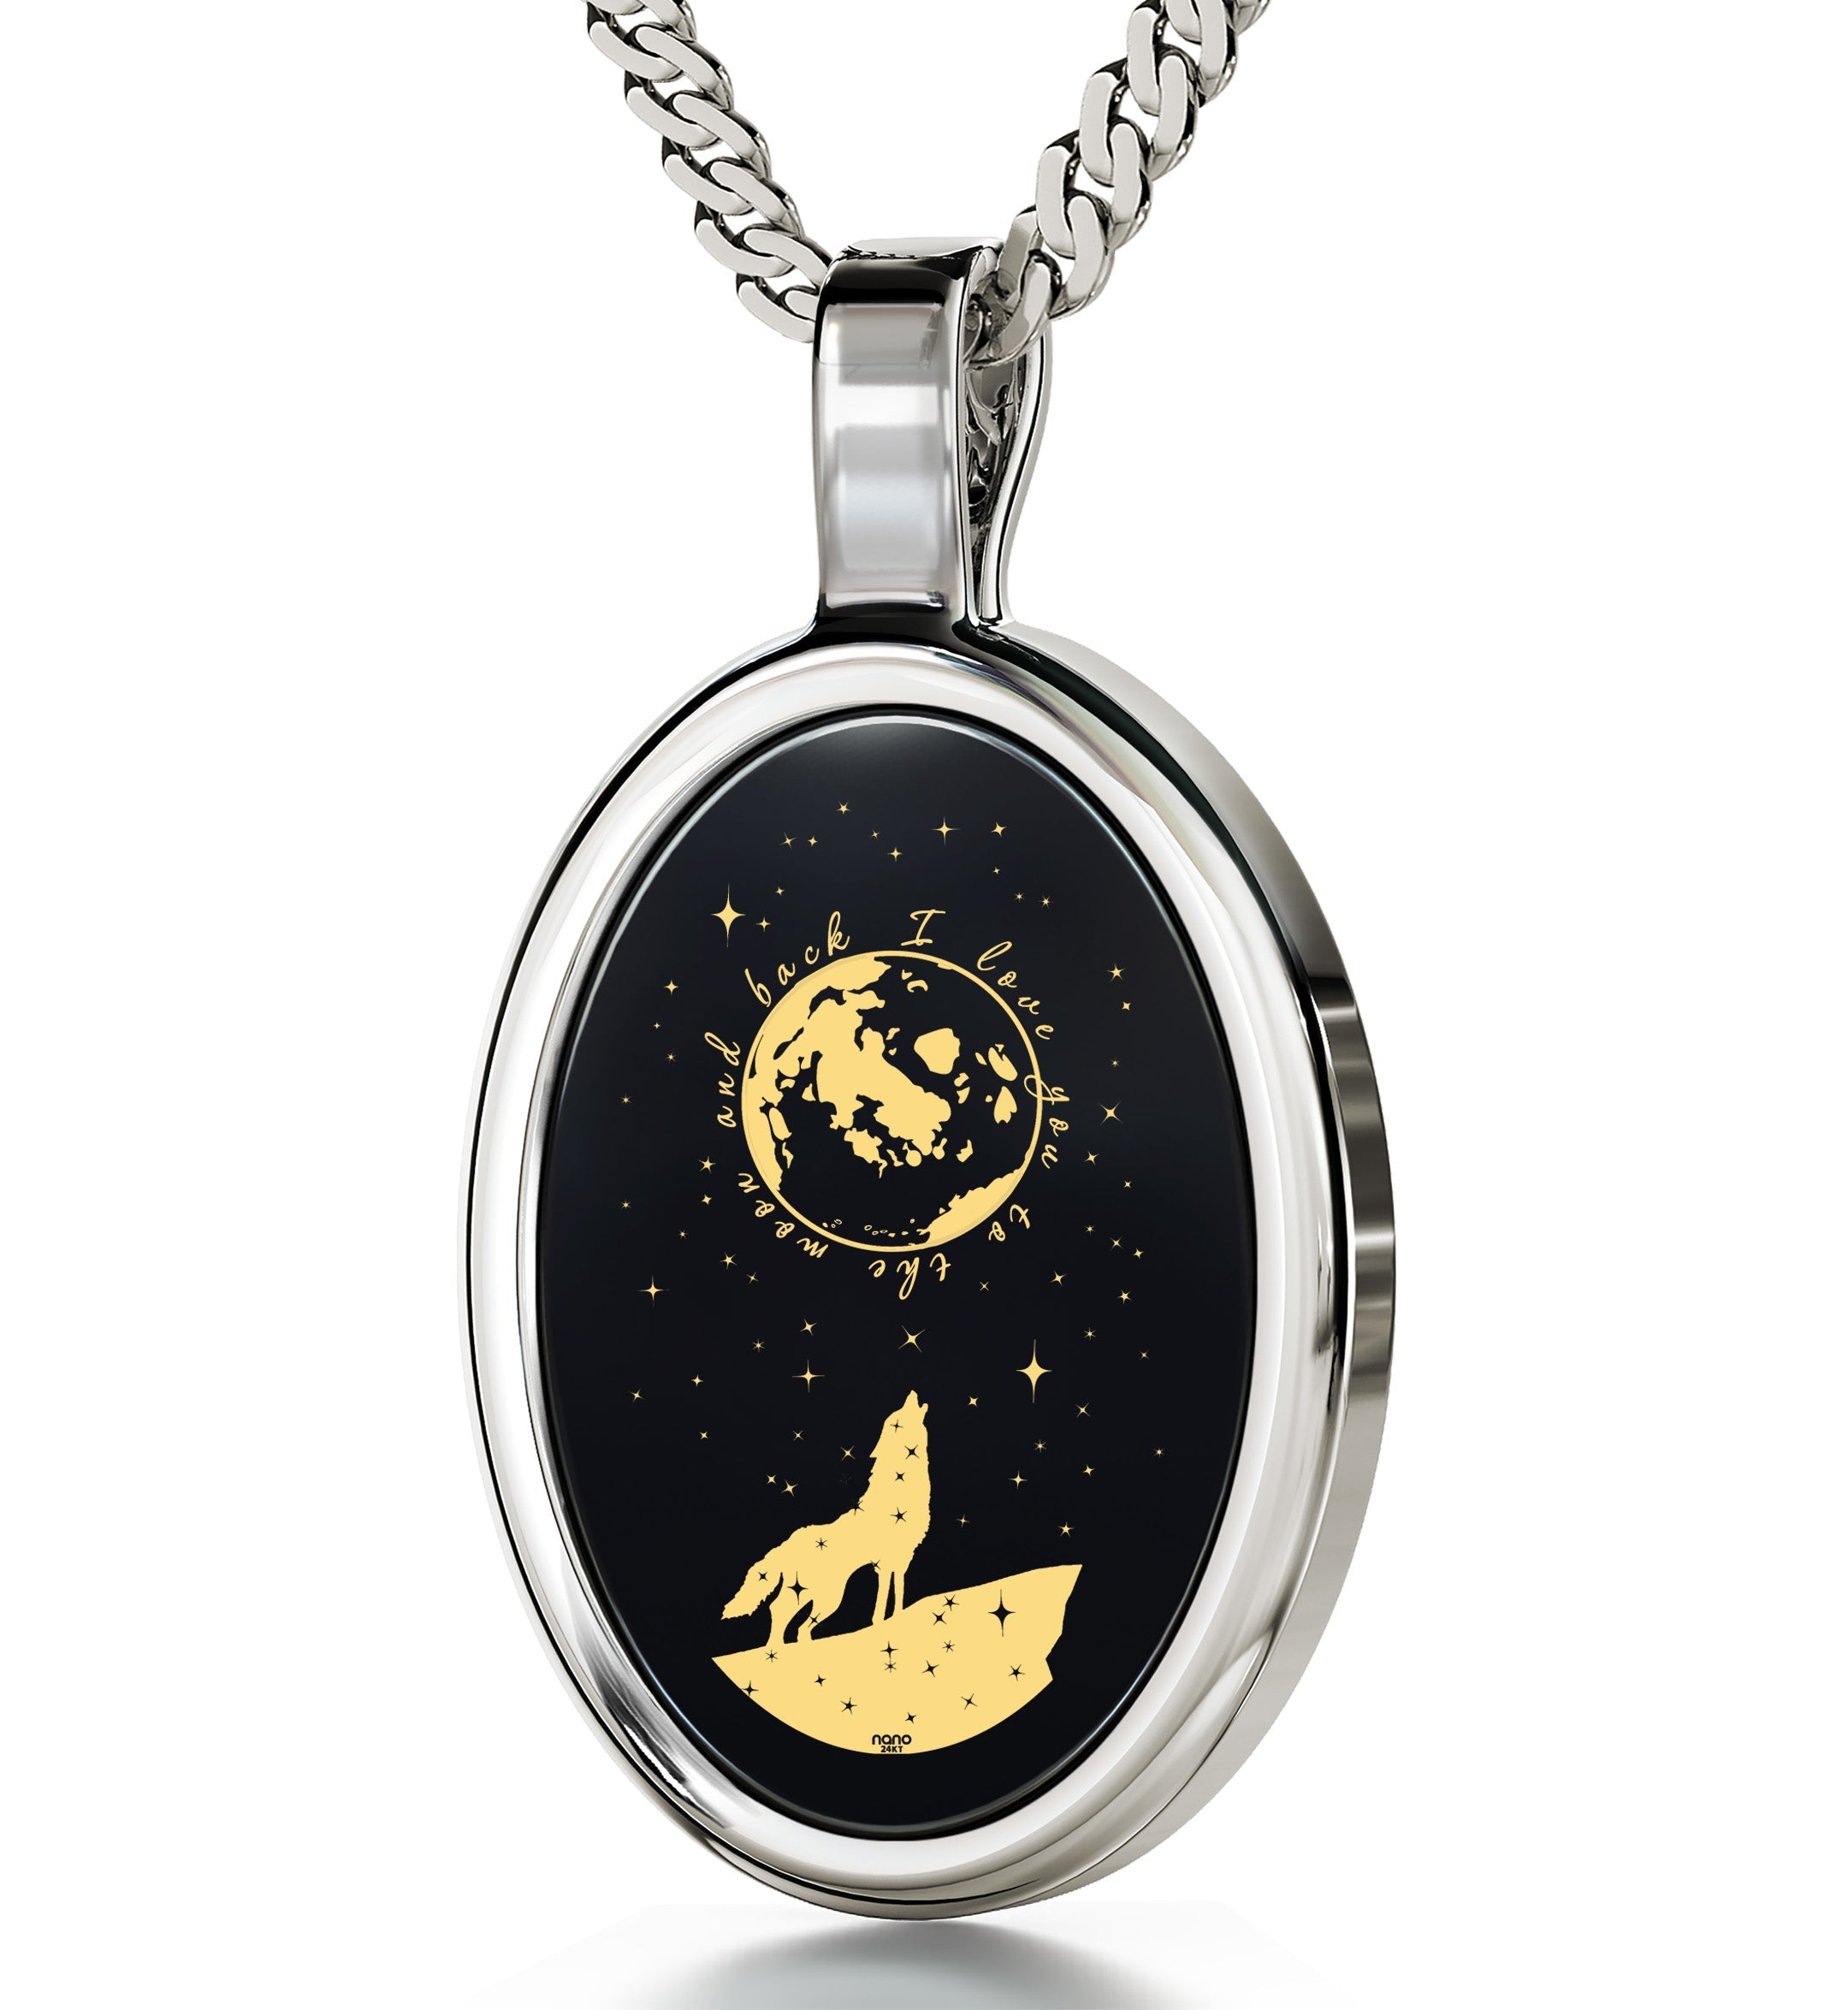 Silver locket pendant with a black and gold design featuring a howling wolf under a starry sky with the word "luck" and a small tag reading I Love You to the Moon and Back Necklace 24k Gold Inscribed on Onyx